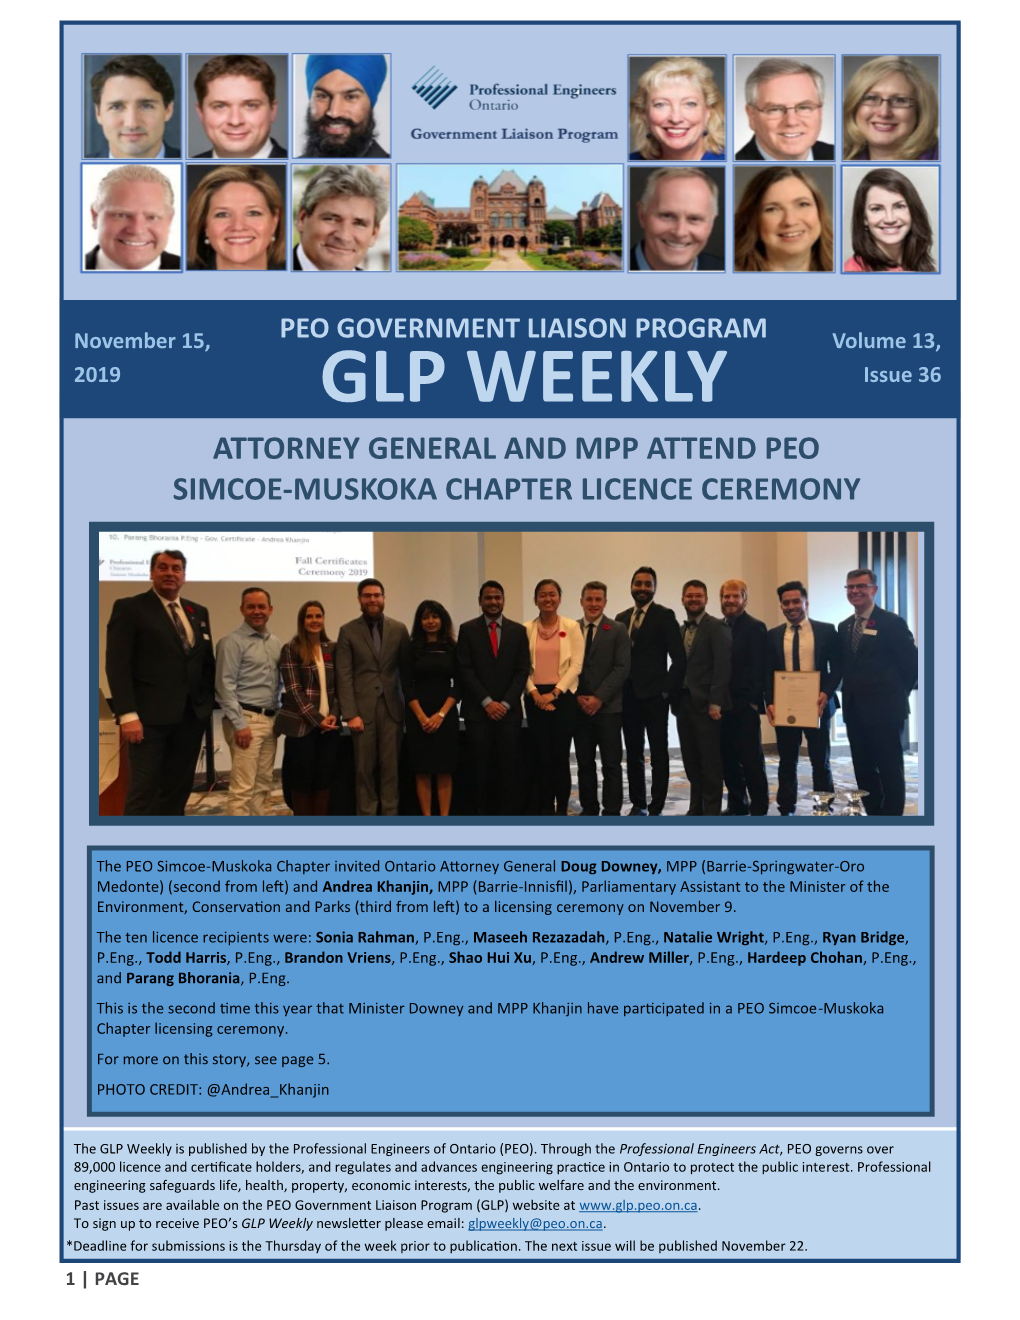 PEO GOVERNMENT LIAISON PROGRAM Volume 13, 2019 GLP WEEKLY Issue 36 ATTORNEY GENERAL and MPP ATTEND PEO SIMCOE-MUSKOKA CHAPTER LICENCE CEREMONY